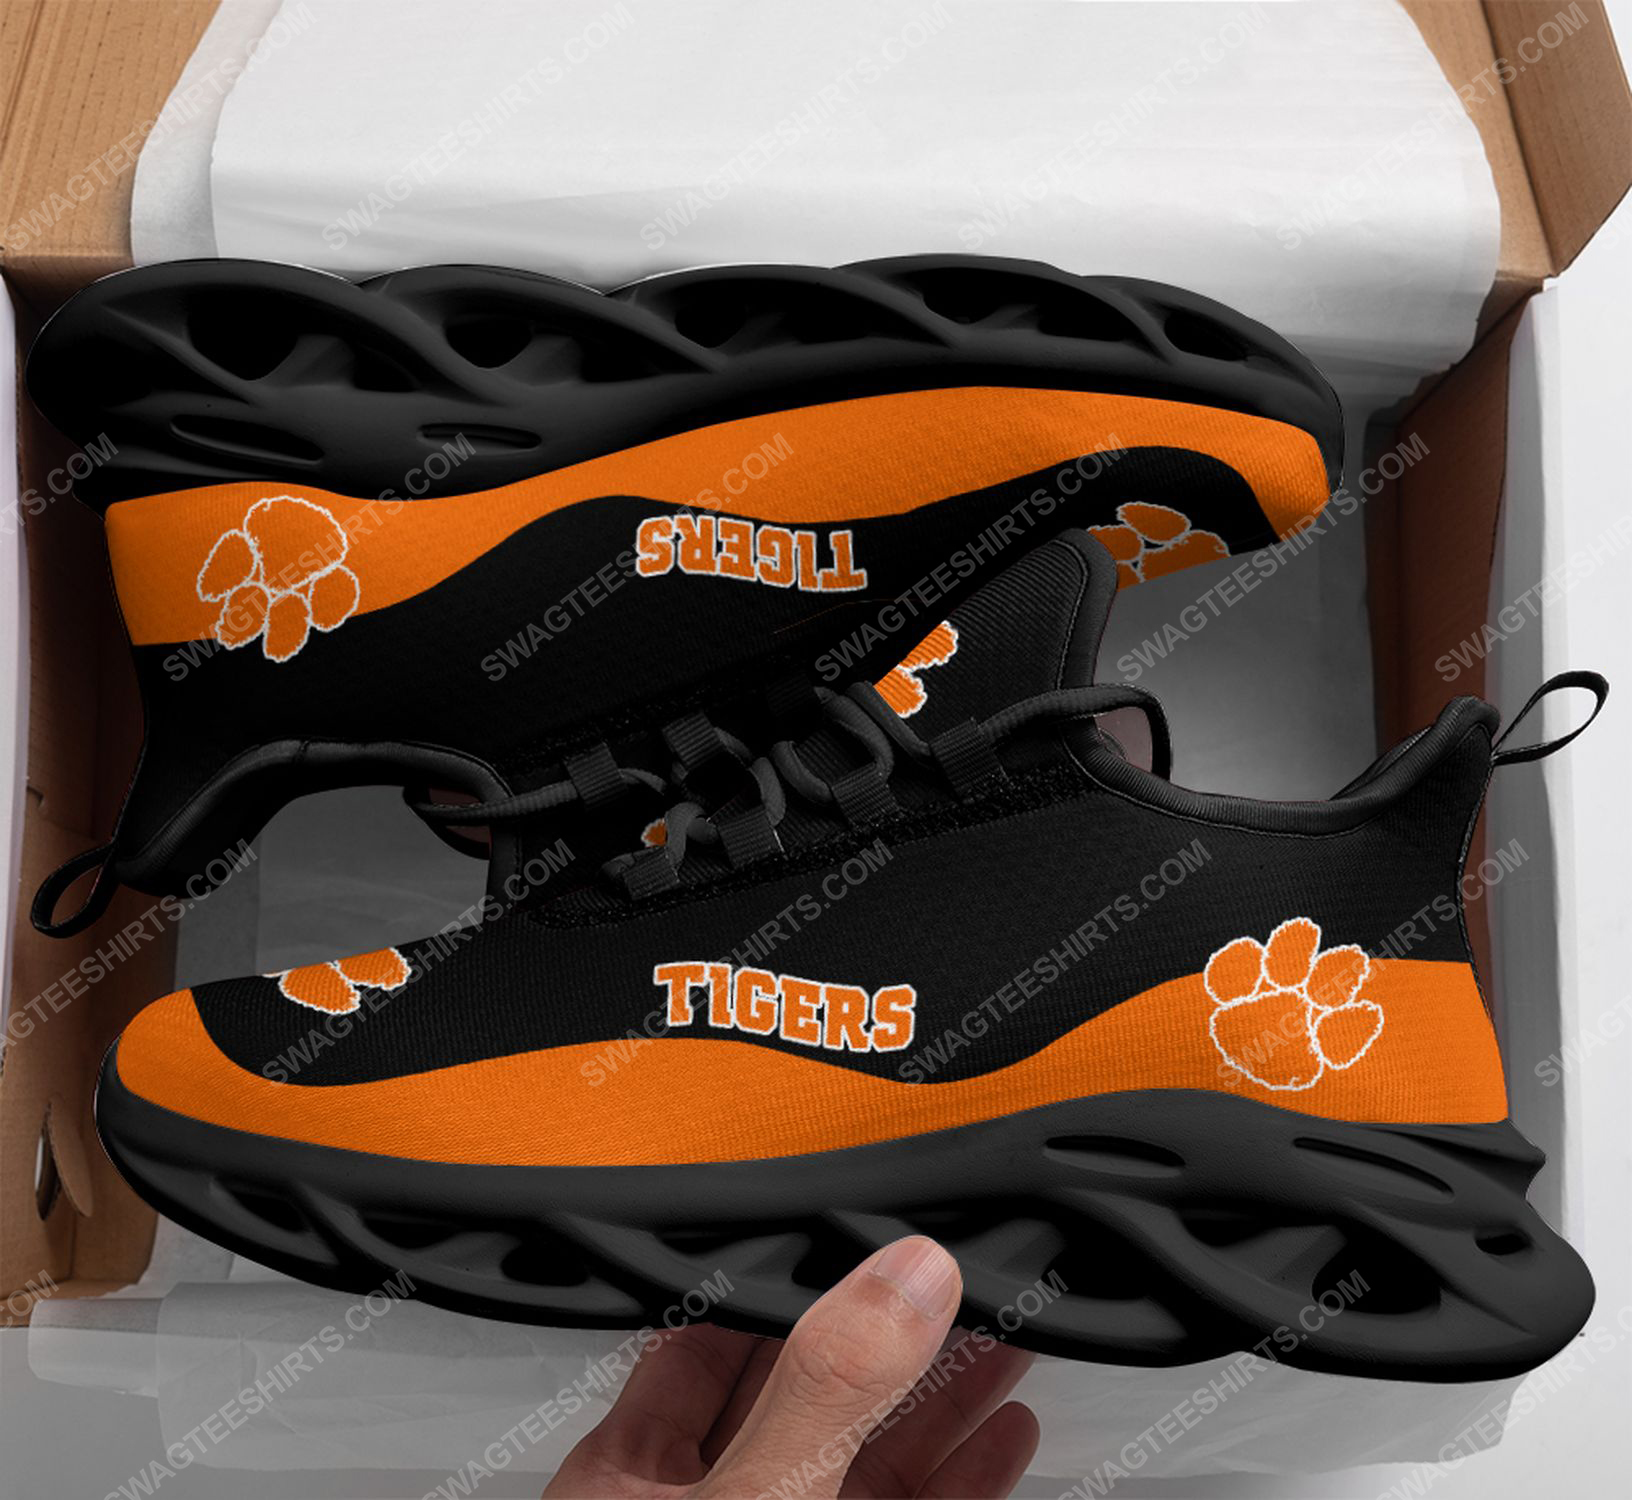 The clemson tigers football team max soul shoes 3